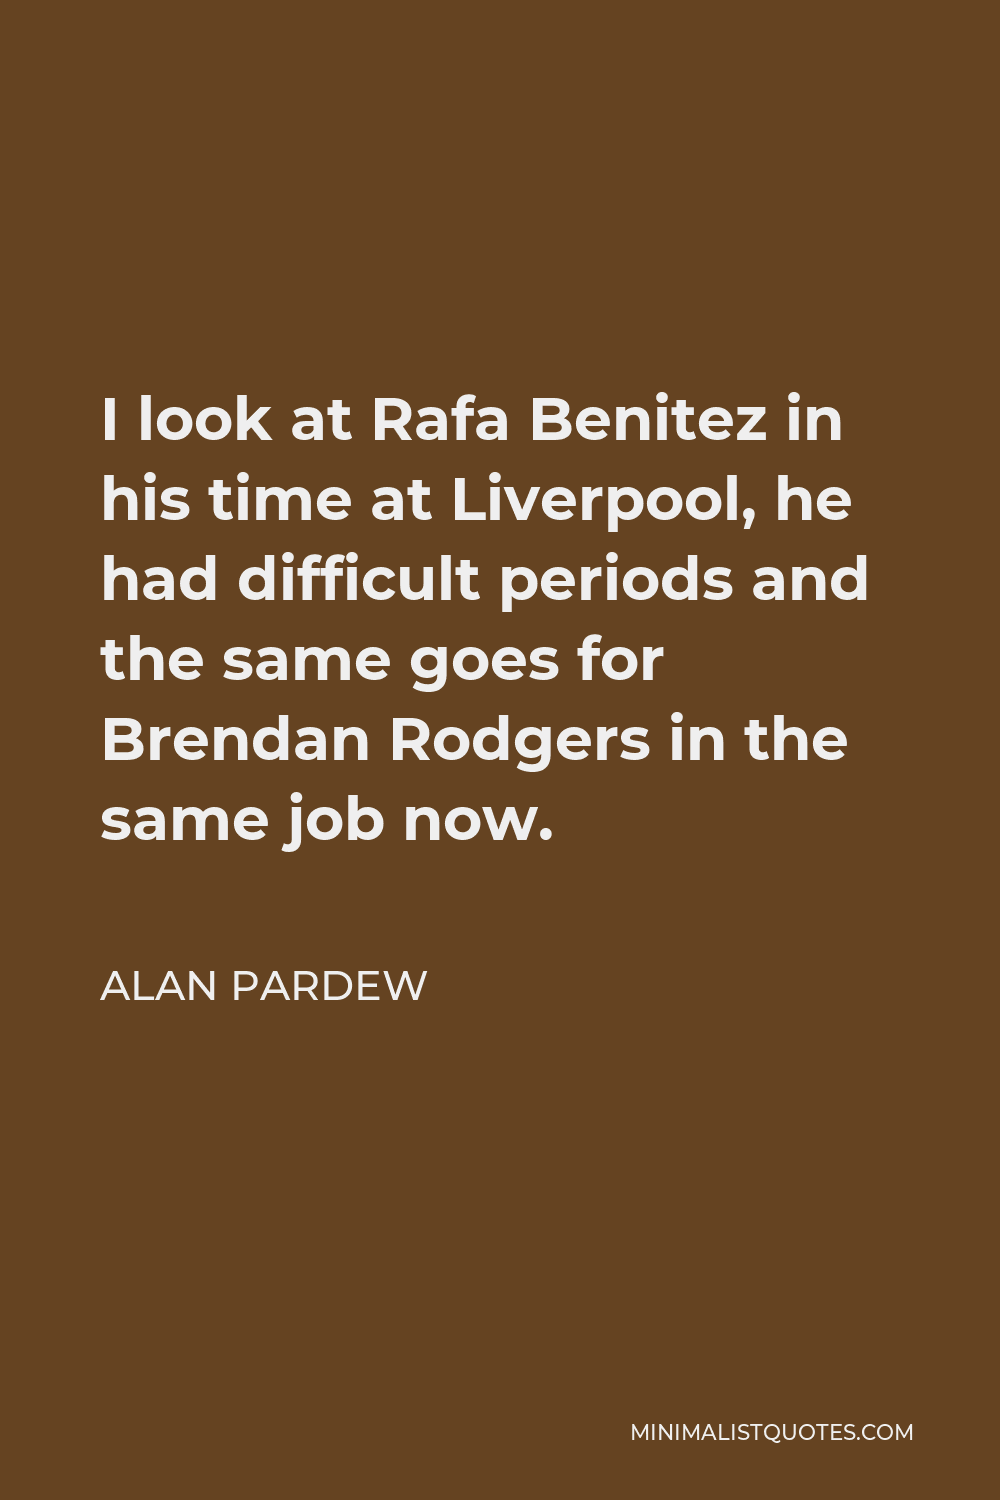 Alan Pardew Quote - I look at Rafa Benitez in his time at Liverpool, he had difficult periods and the same goes for Brendan Rodgers in the same job now.